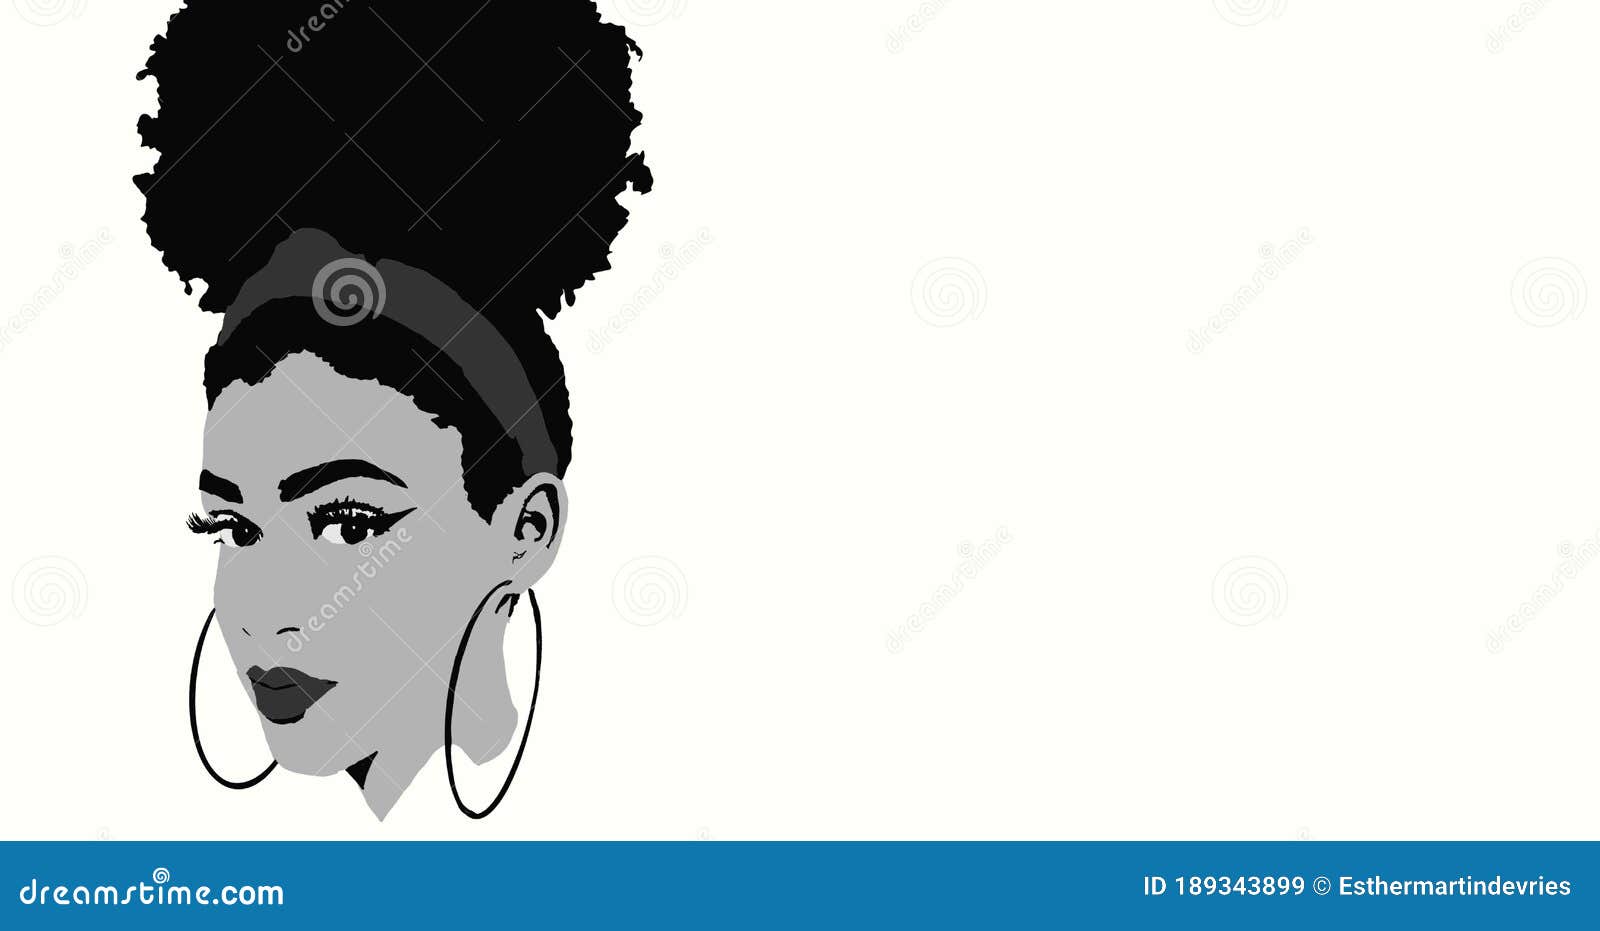 Cute Black African American Girl or Woman with High Puff Afro Hair Style  and Make Up Stock Illustration - Illustration of drawn, cute: 189343899